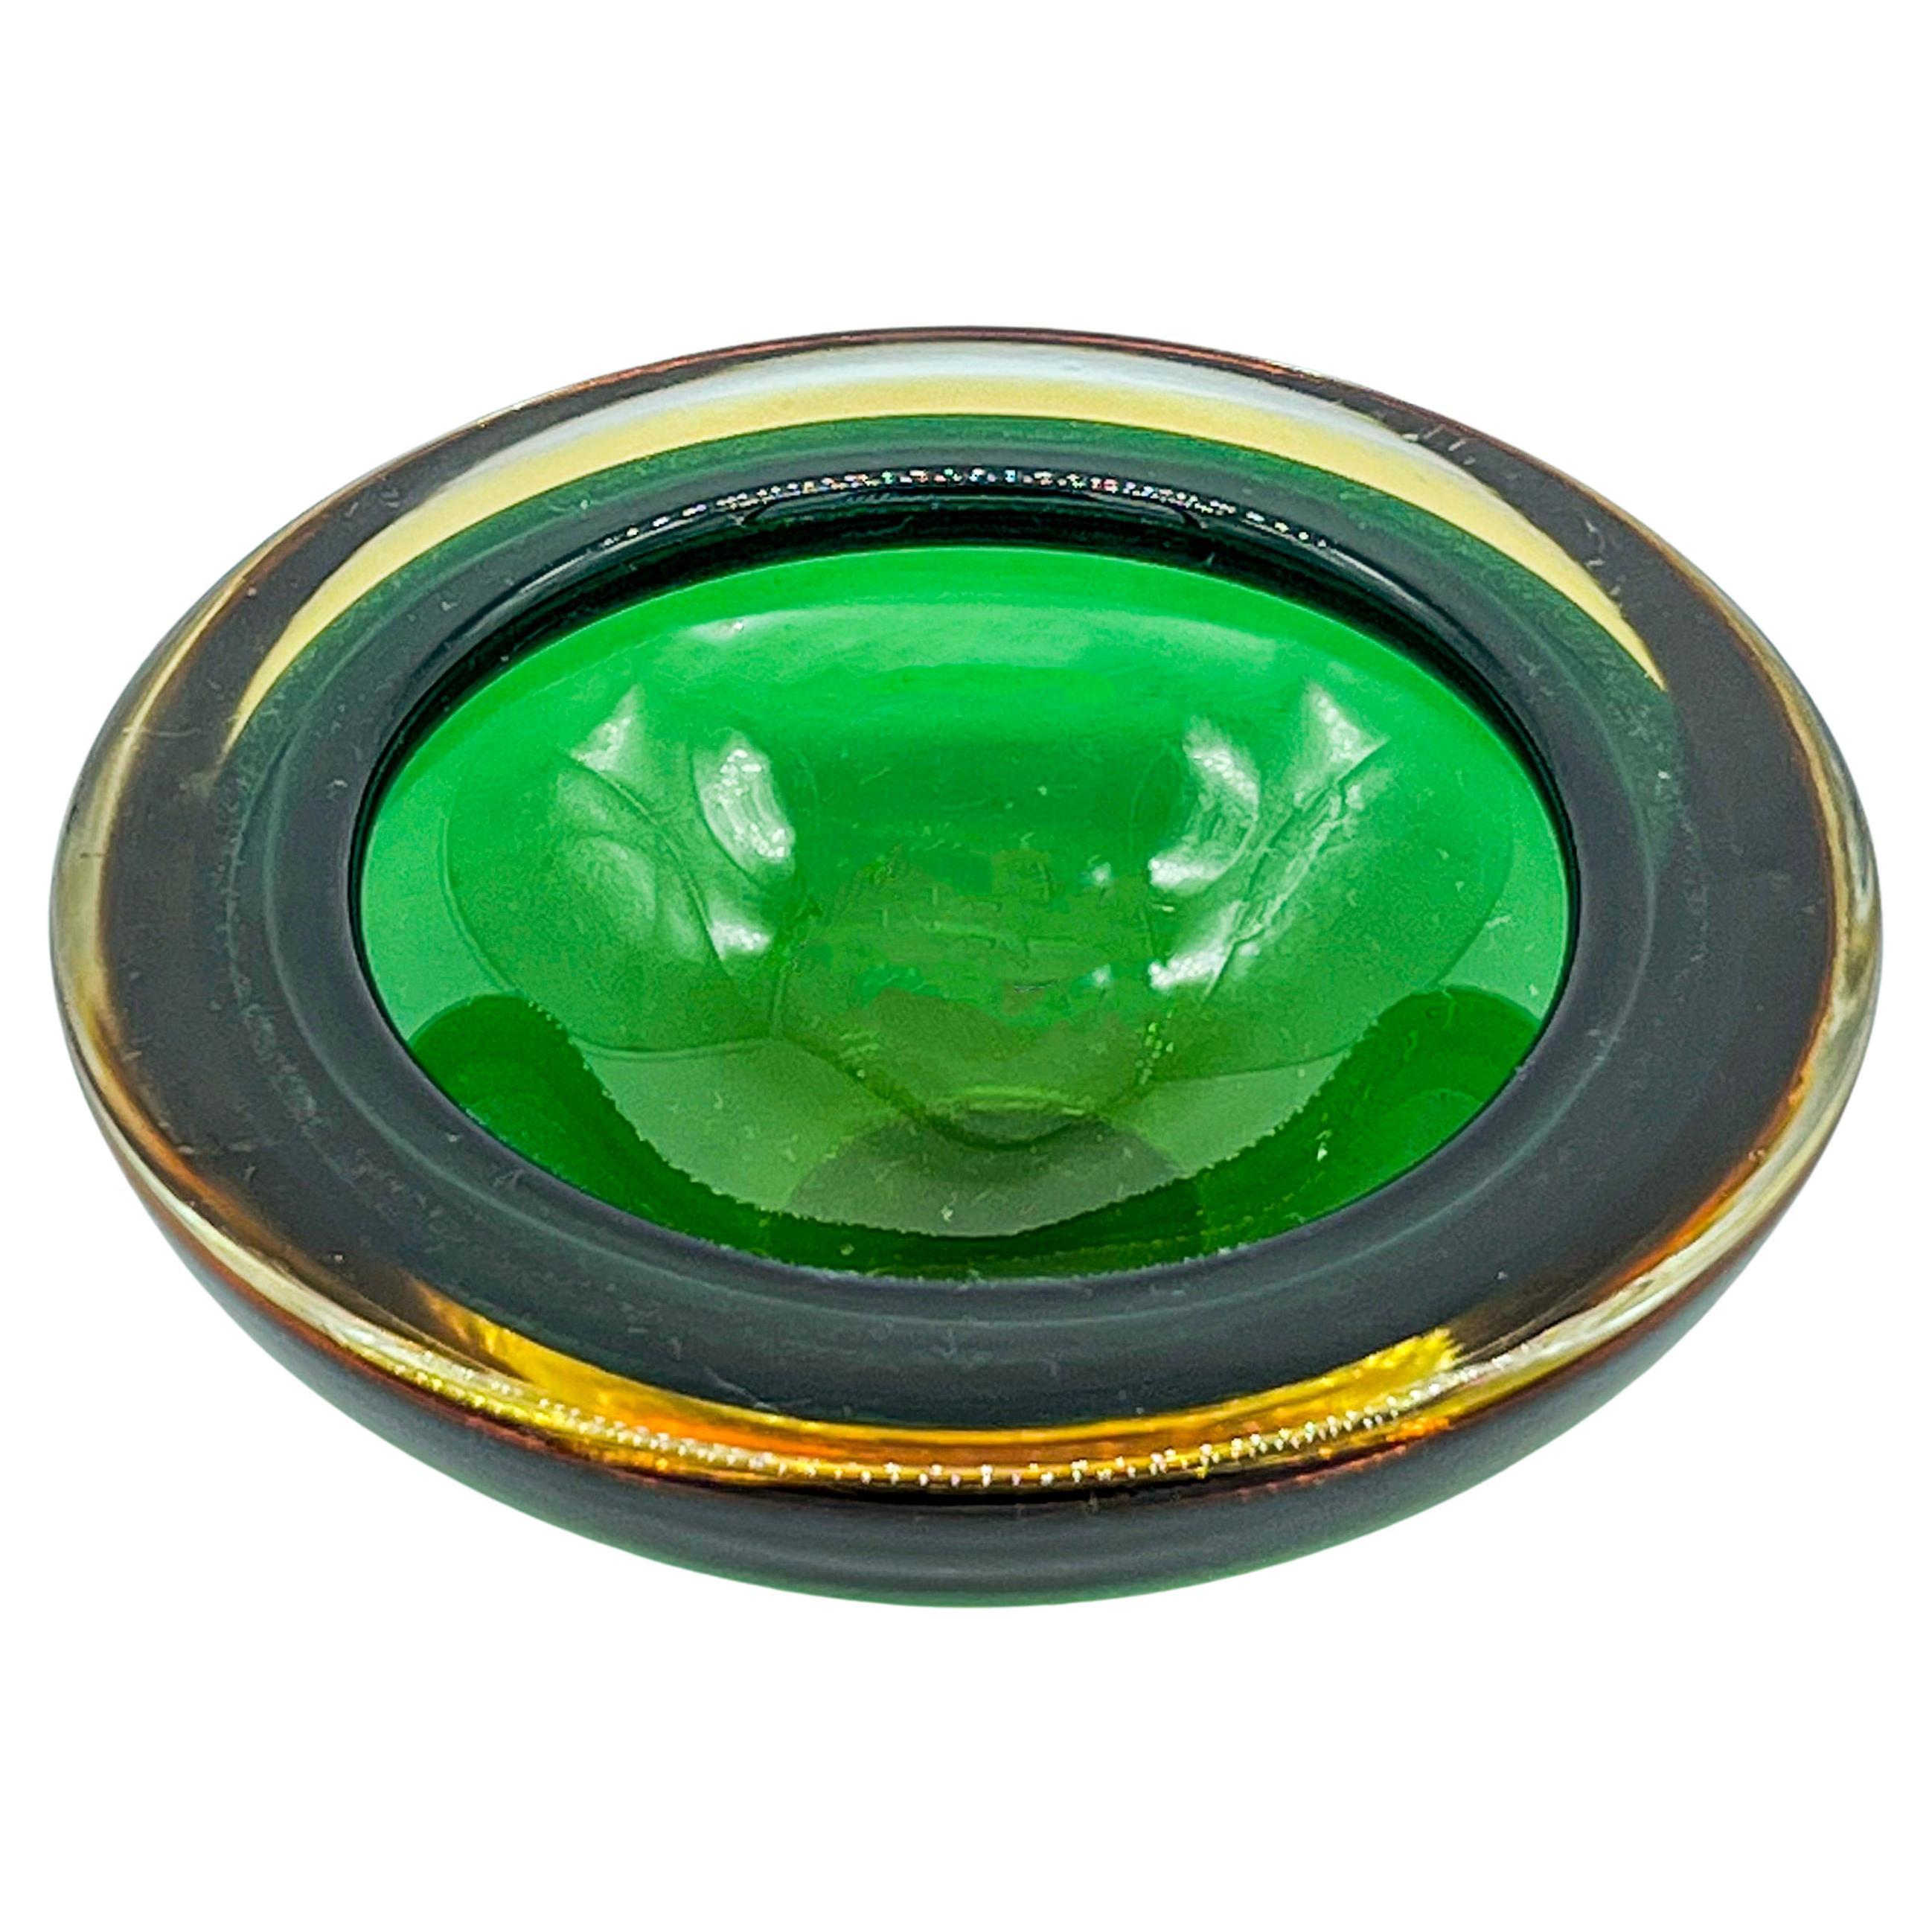 Vintage Mid-Century Modern "Sommerso" Bowl in Green and Yellow Murano Glass